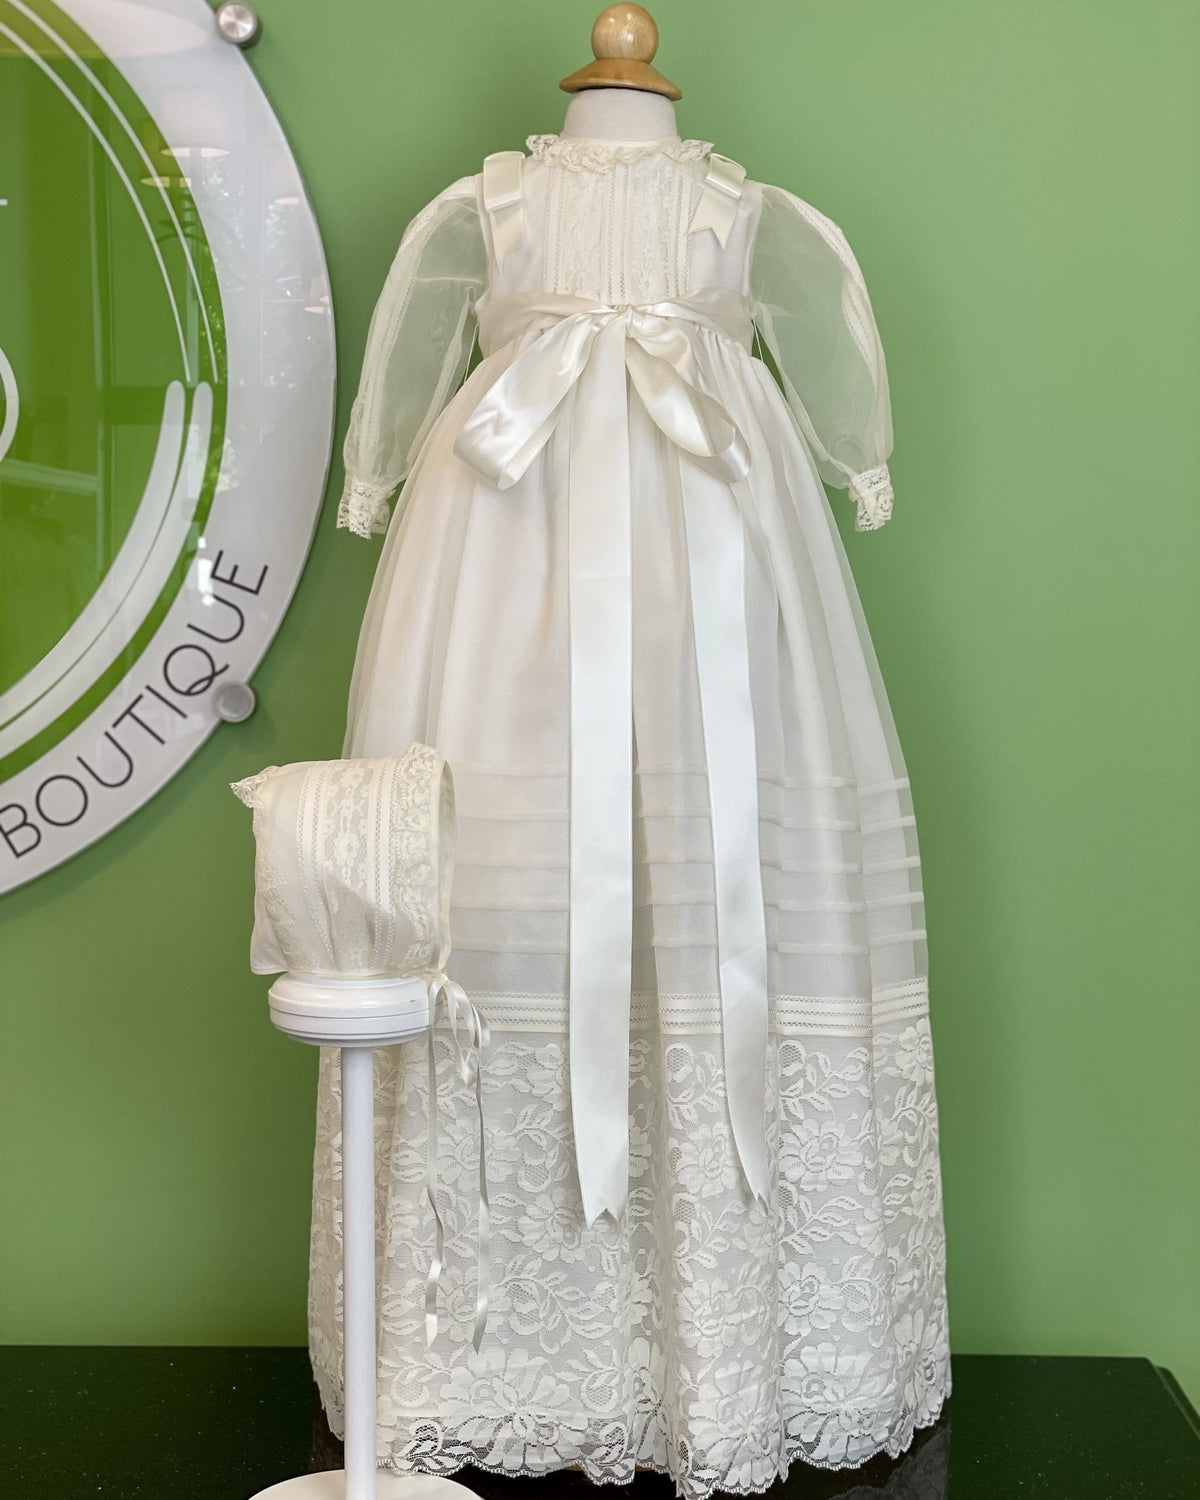 Girls Christening Gowns - Boys Baptism Suits - Rompers -Christening-Gowns .net